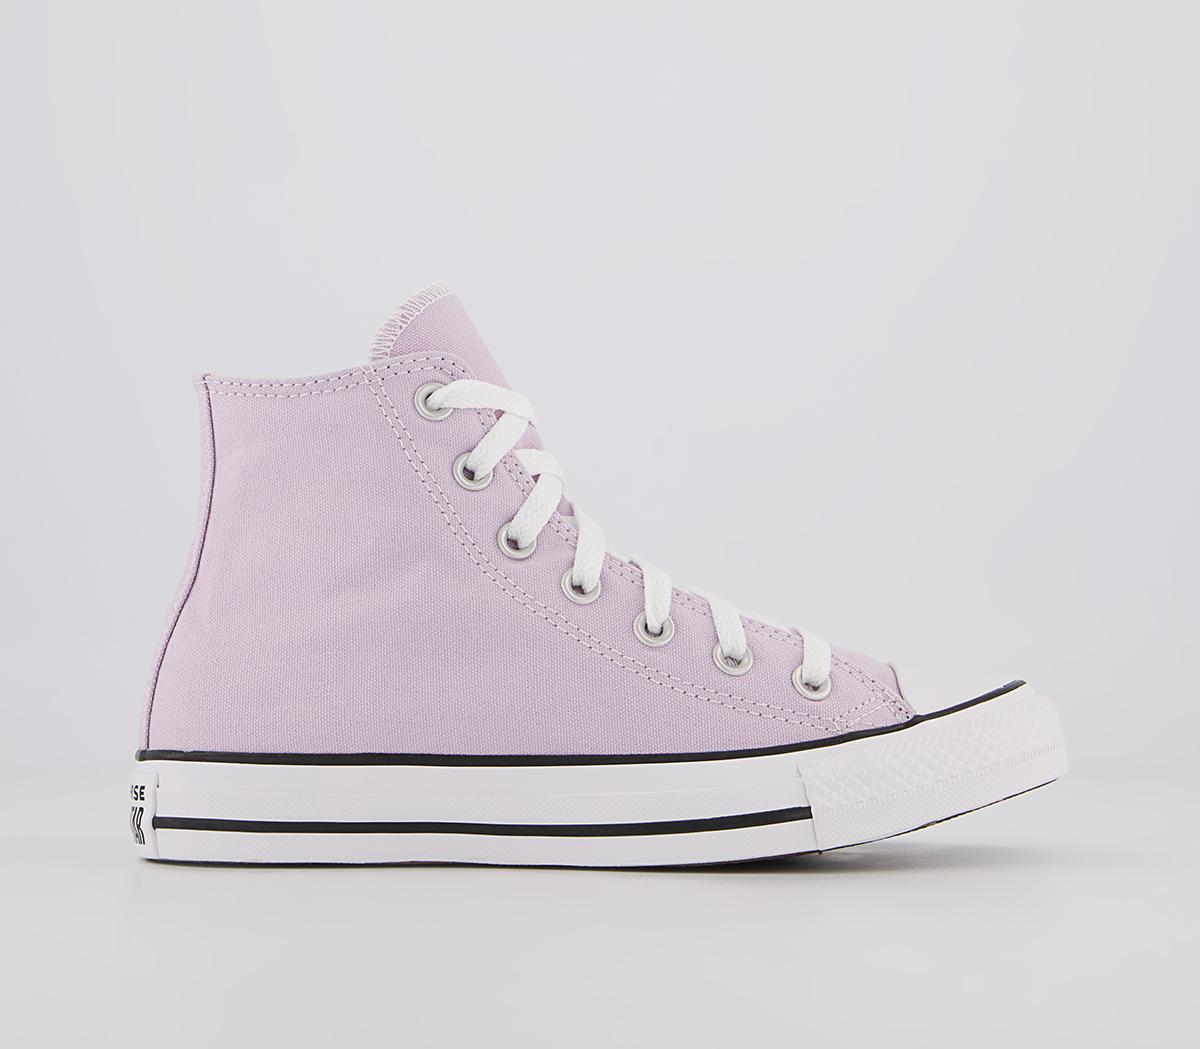 ConverseConverse All Star Hi TrainersPale Amethyst